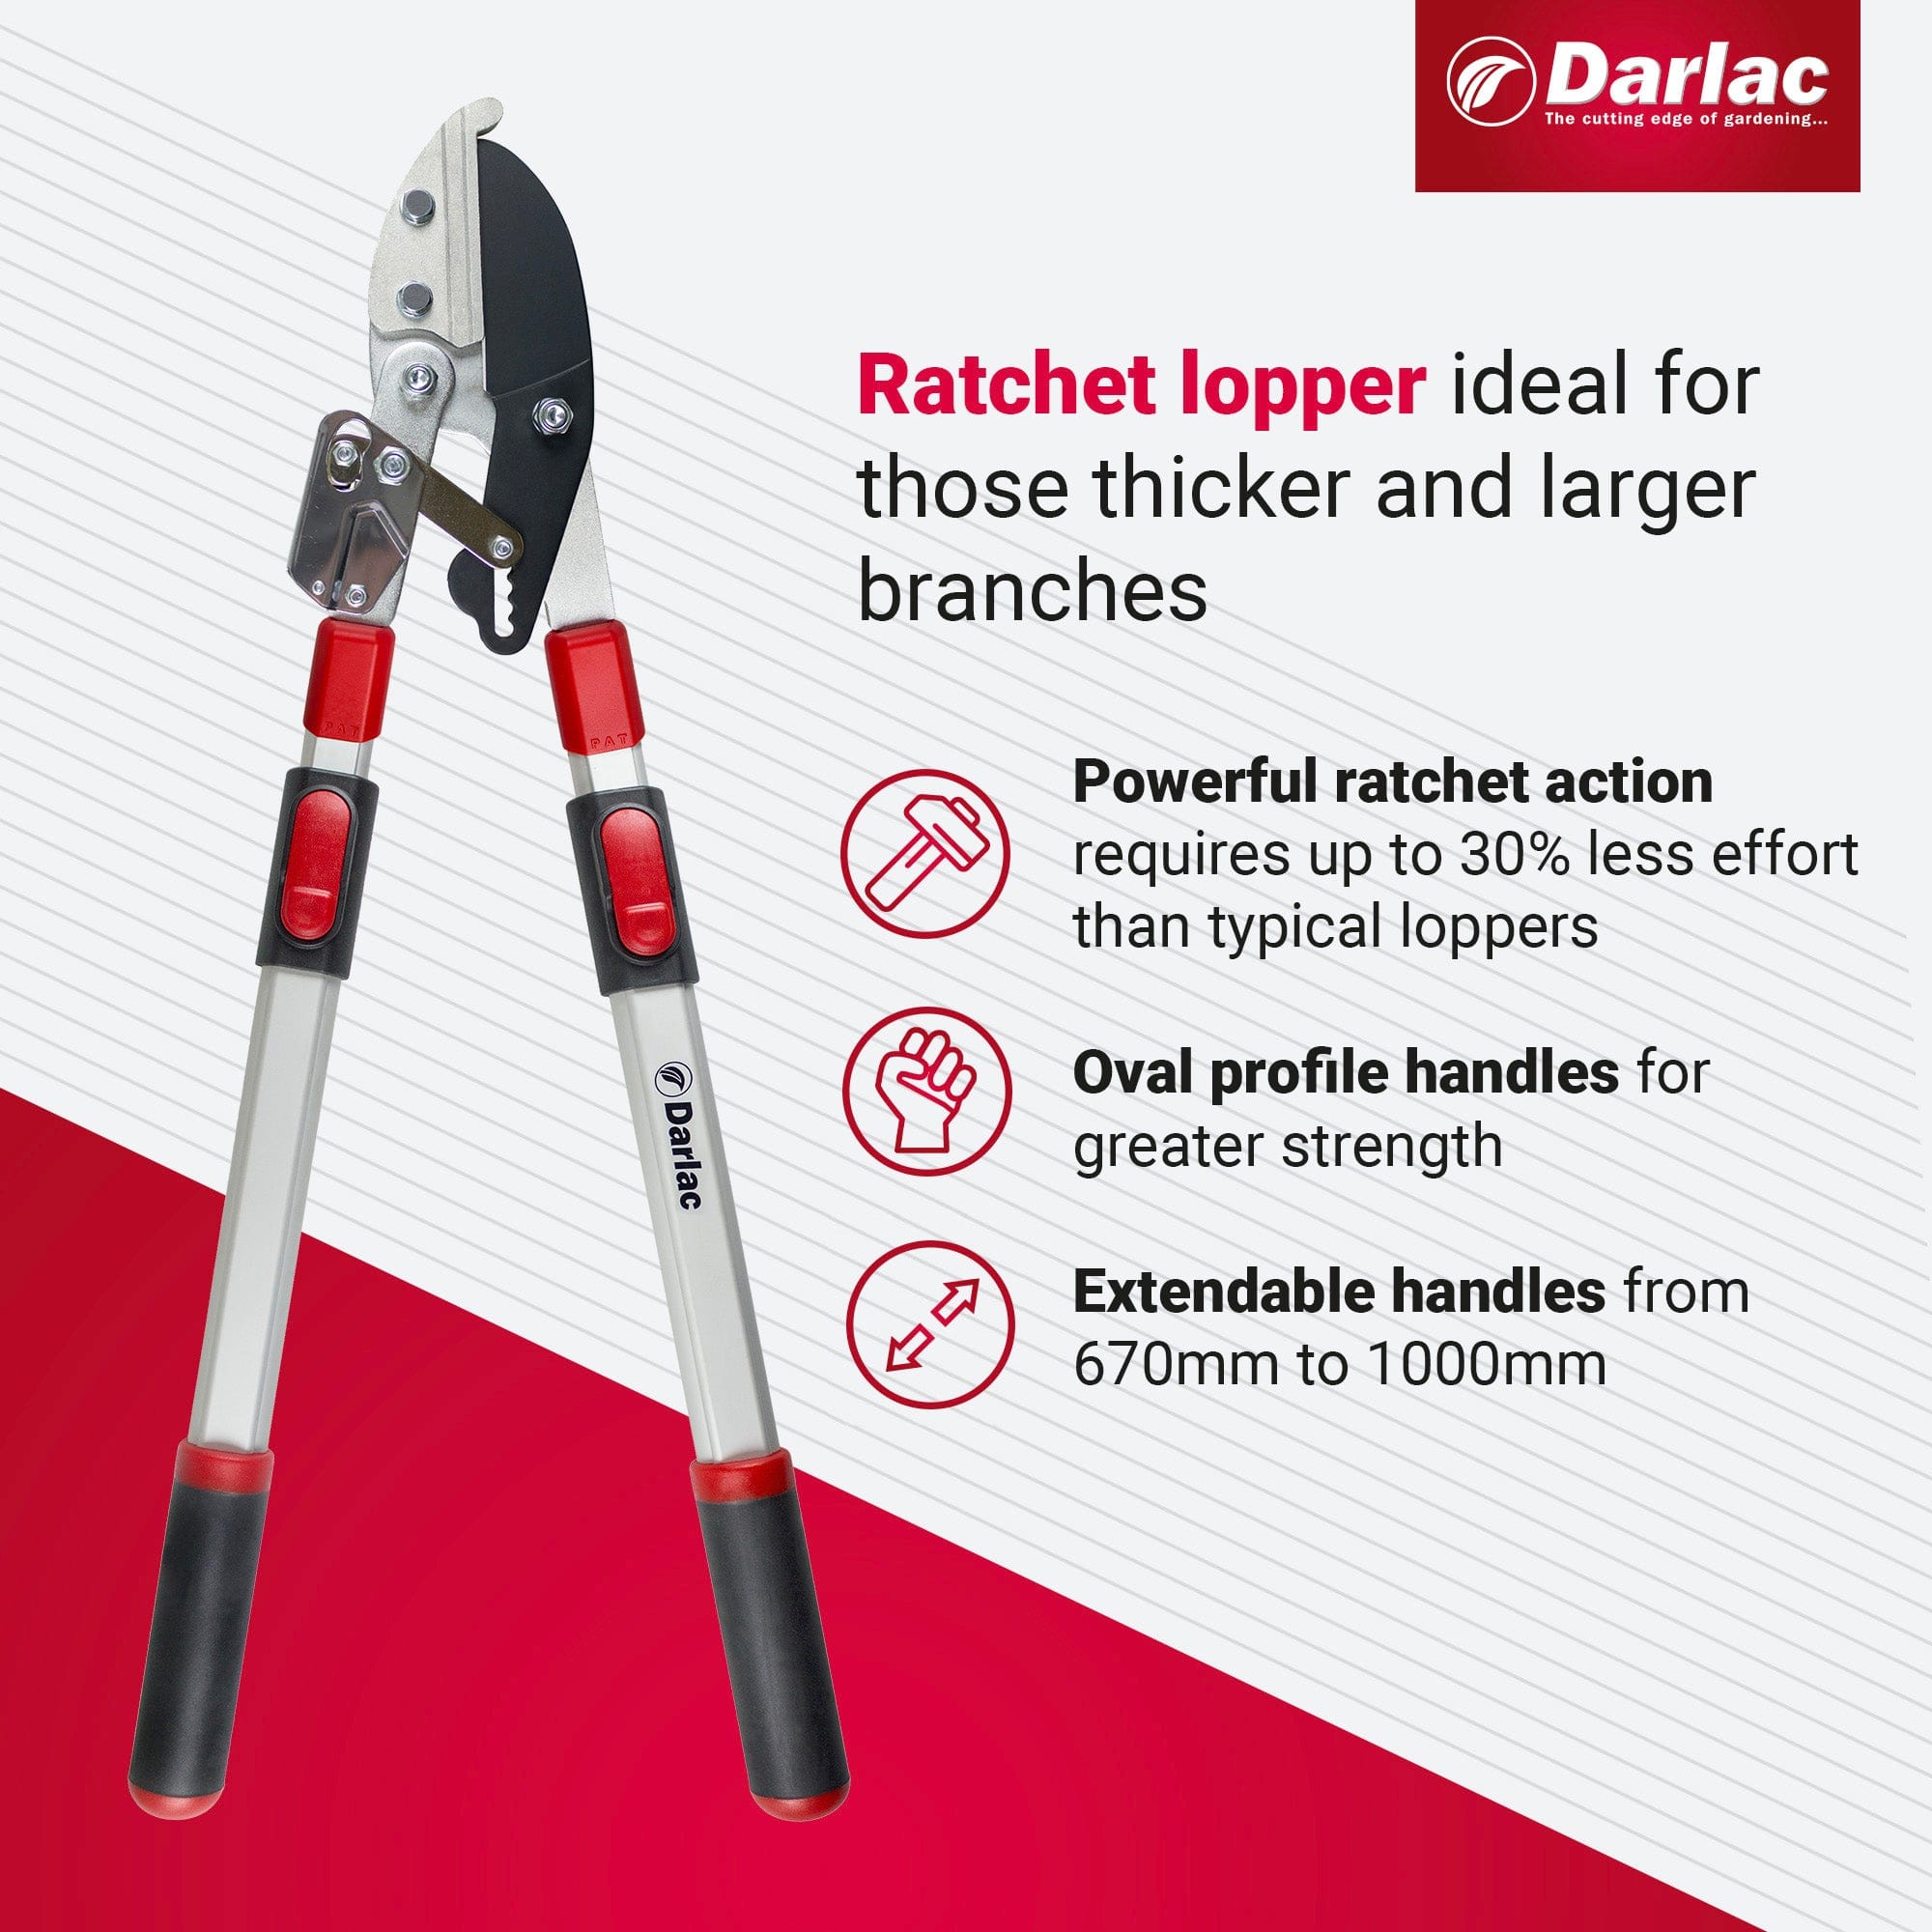 dt-brown HARDWARE Darlac Telescopic Ratchet Lopper